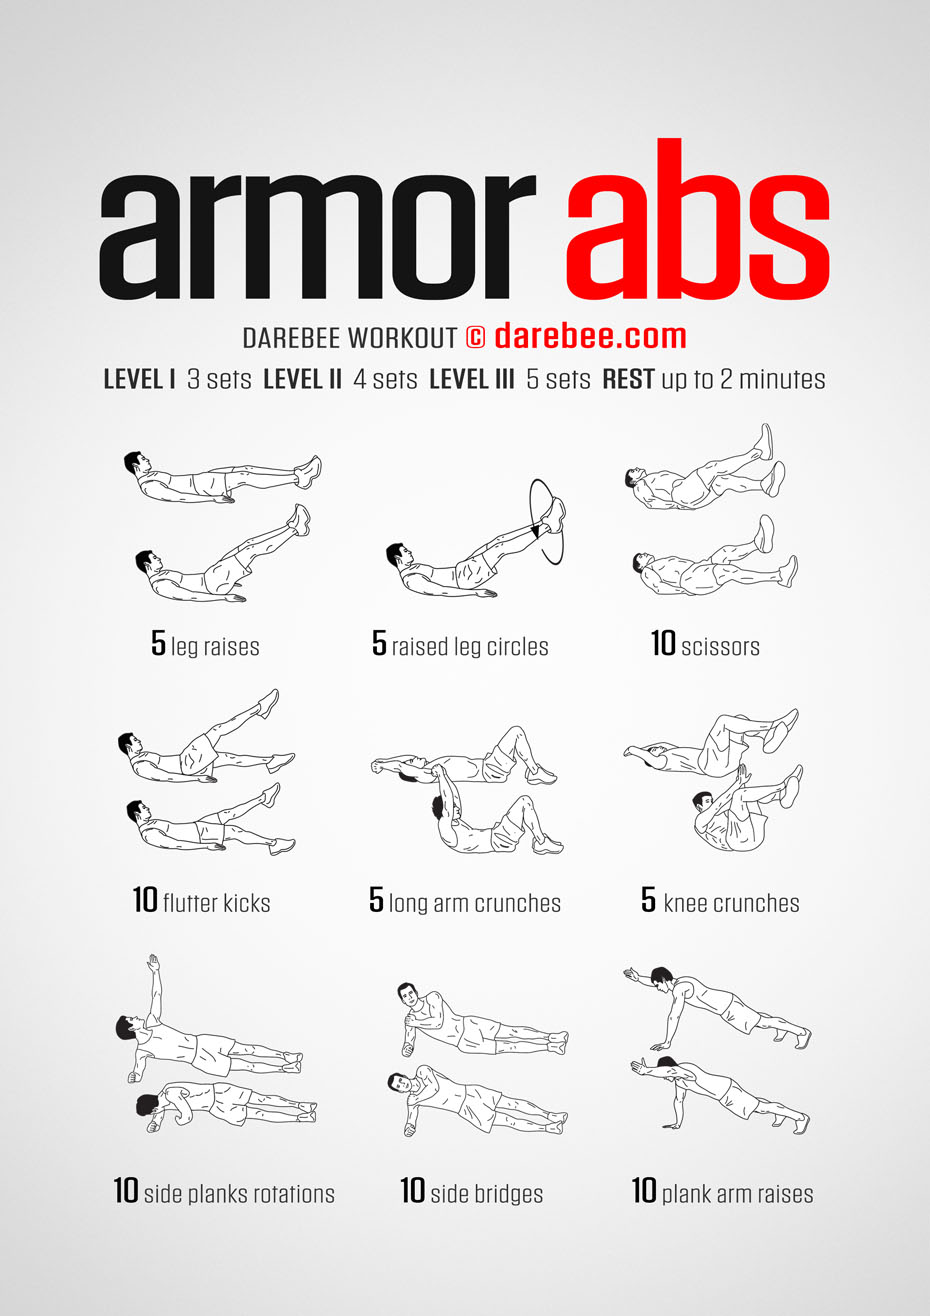 Armor Abs Workout